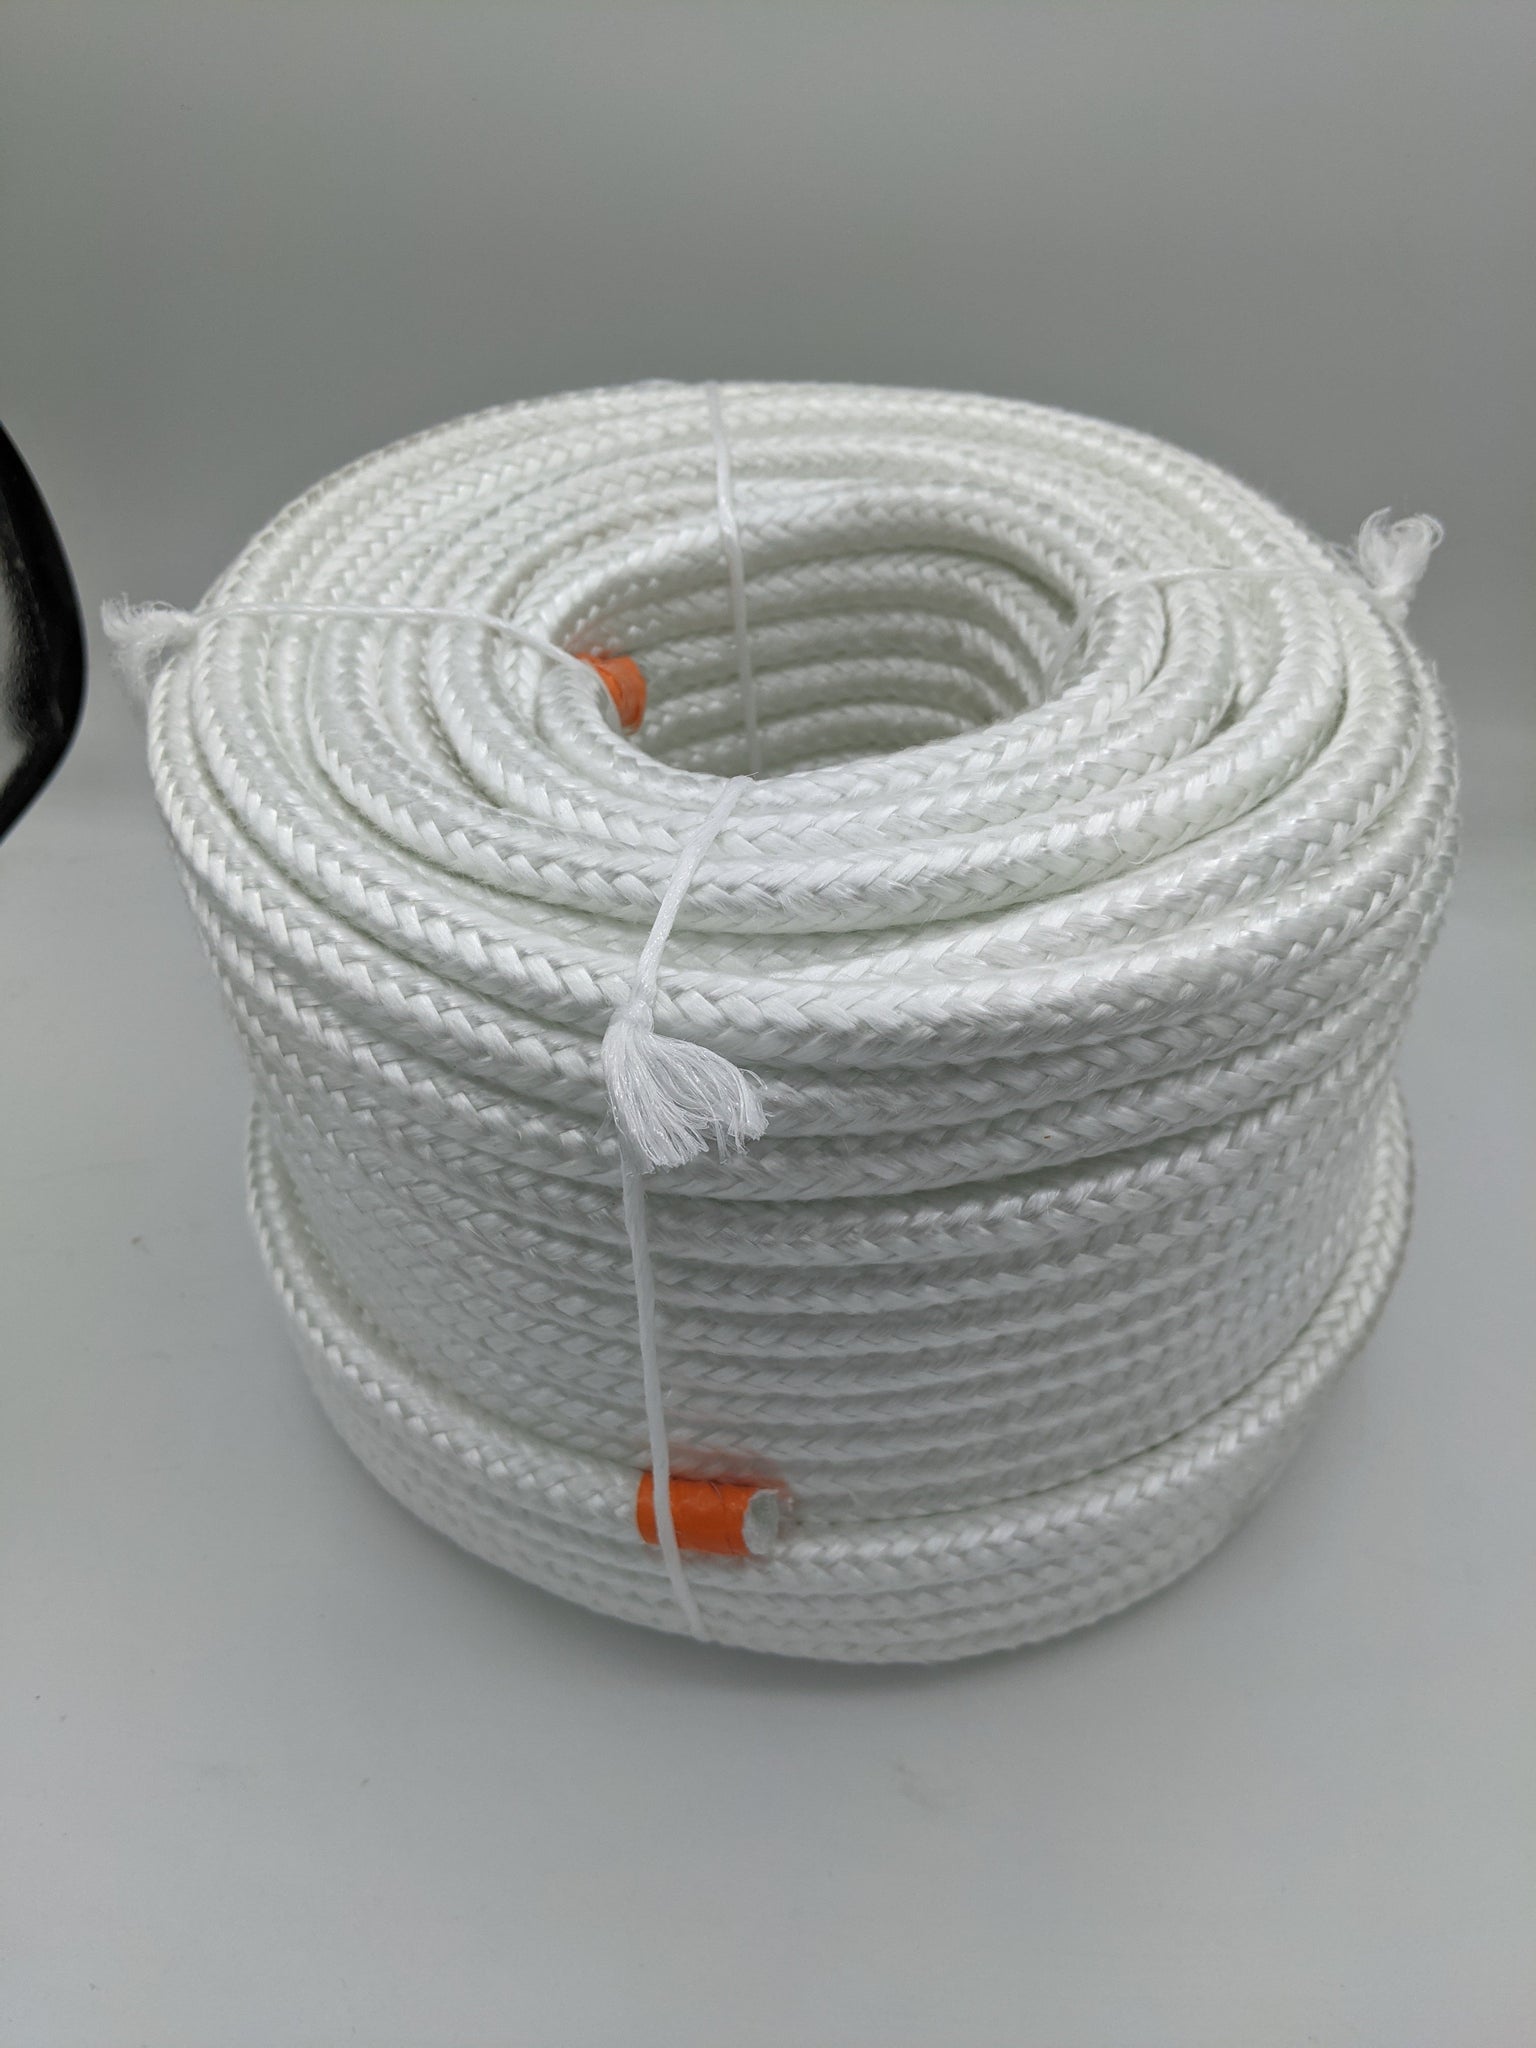 GLASS PLAITED PACKING 6mm.SQUAREx100M.